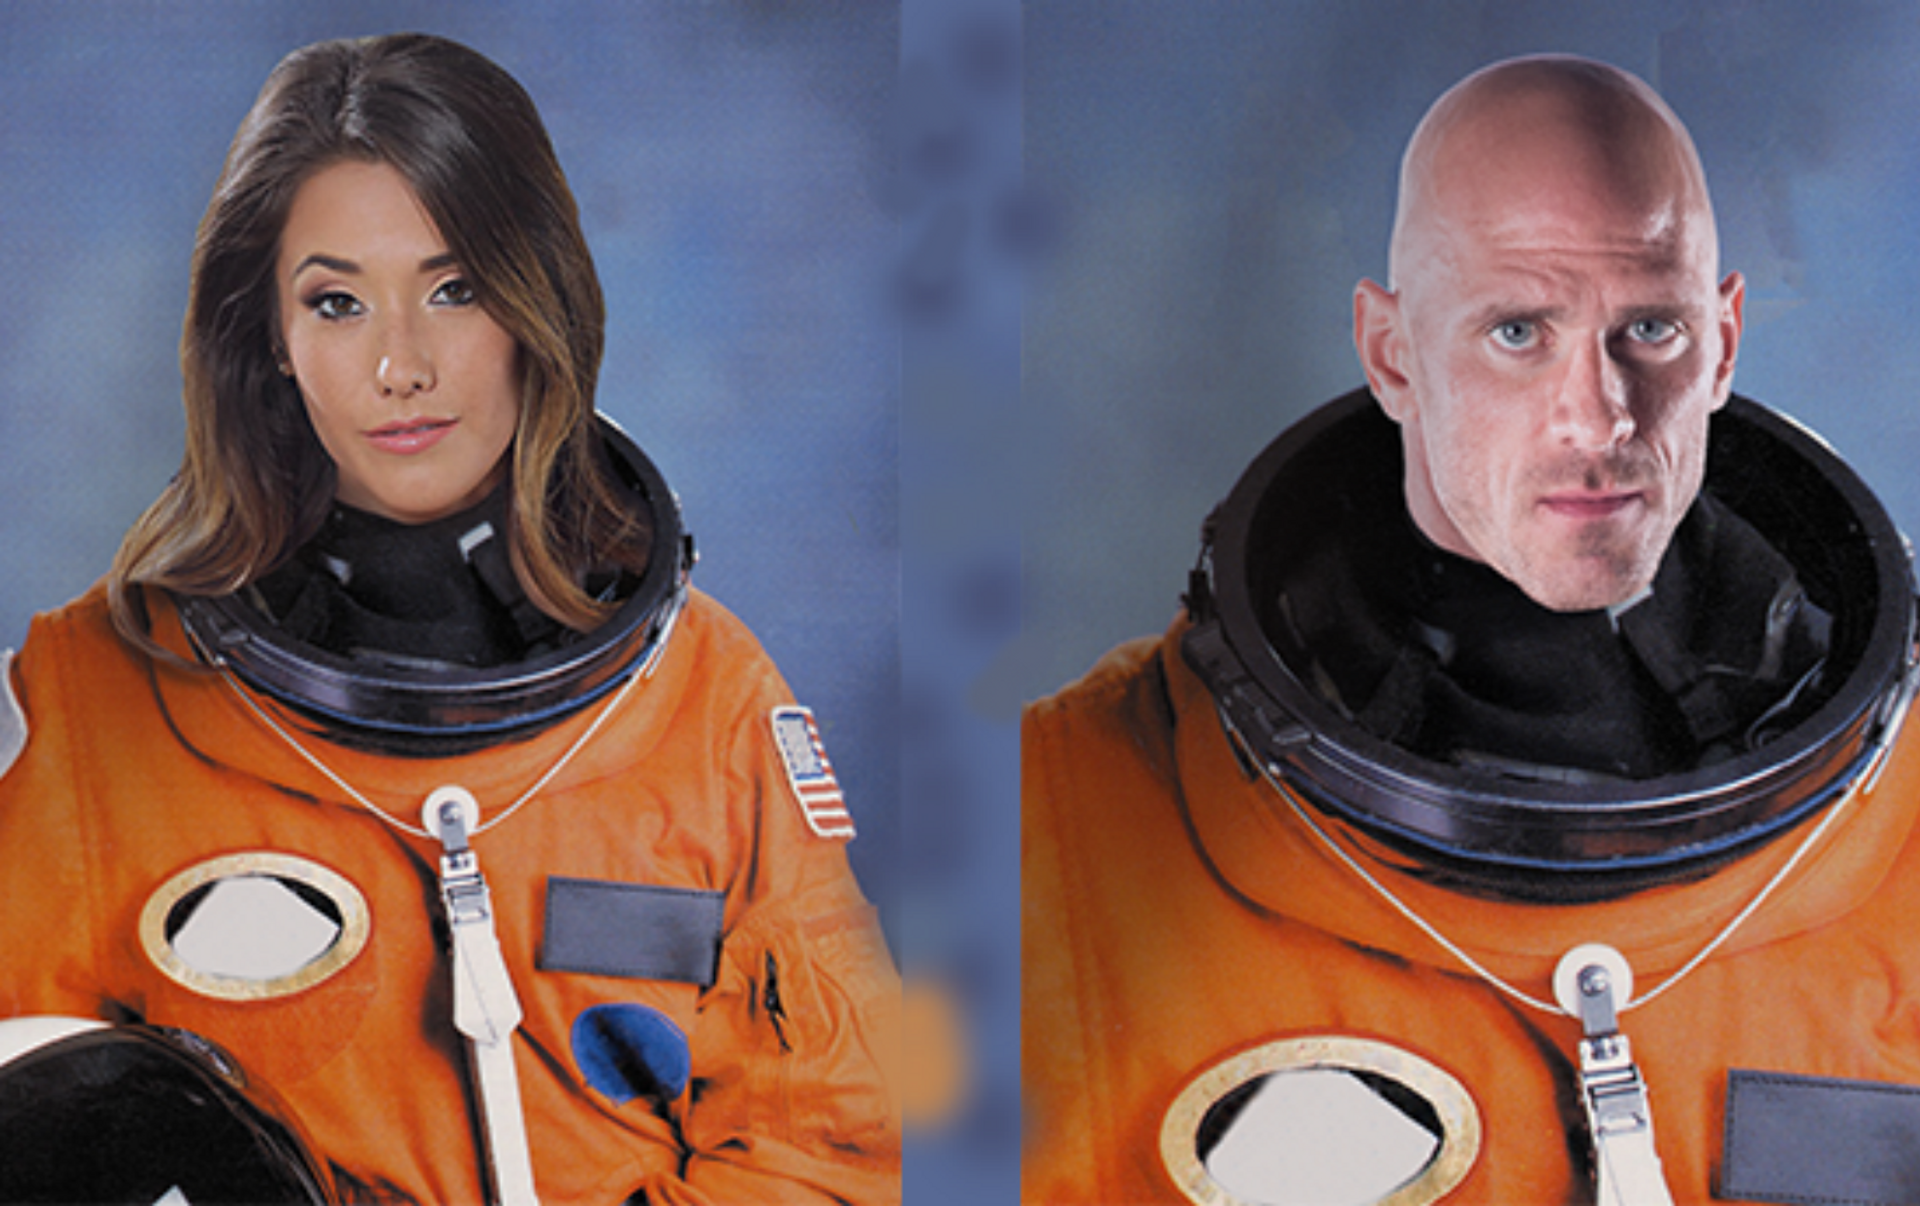 althea murray add johnny sins in space photo